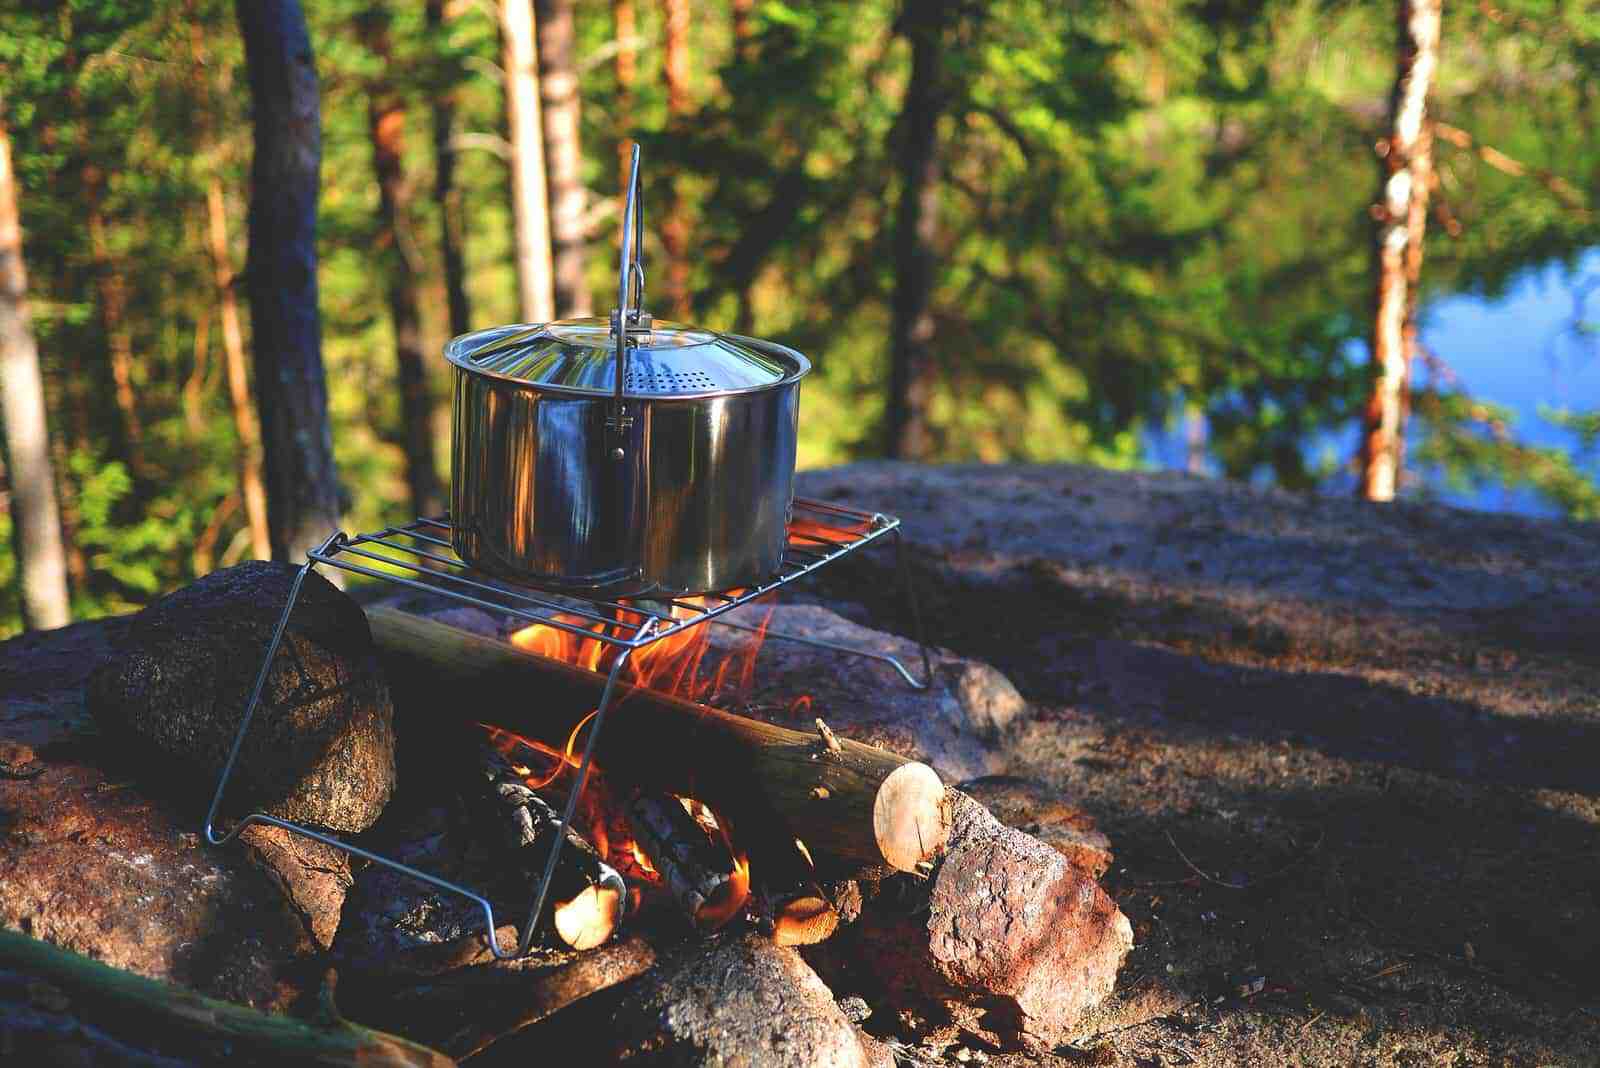 Tips for choosing a bushcraft and survival school